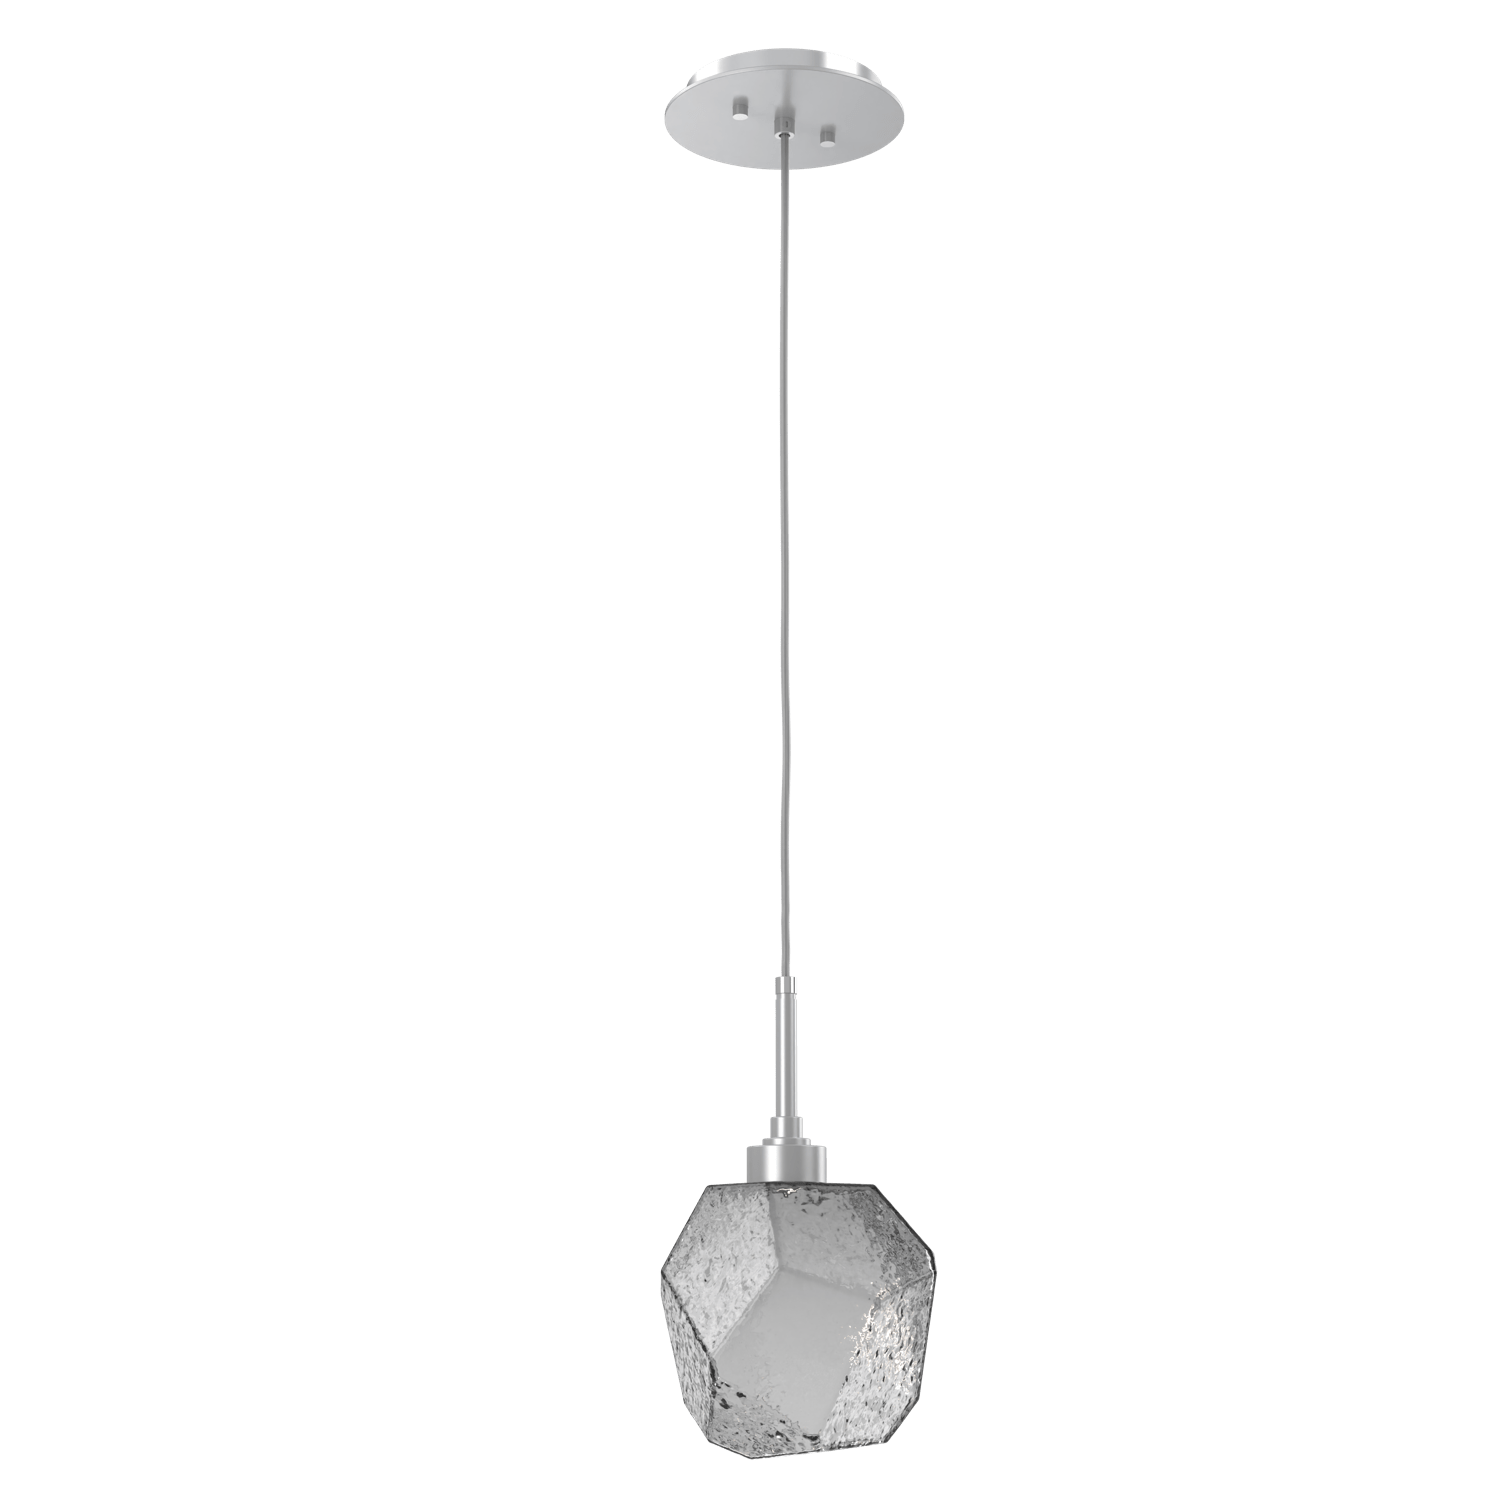 LAB0039-01-CS-S-Hammerton-Studio-Gem-pendant-light-with-classic-silver-finish-and-smoke-blown-glass-shades-and-LED-lamping